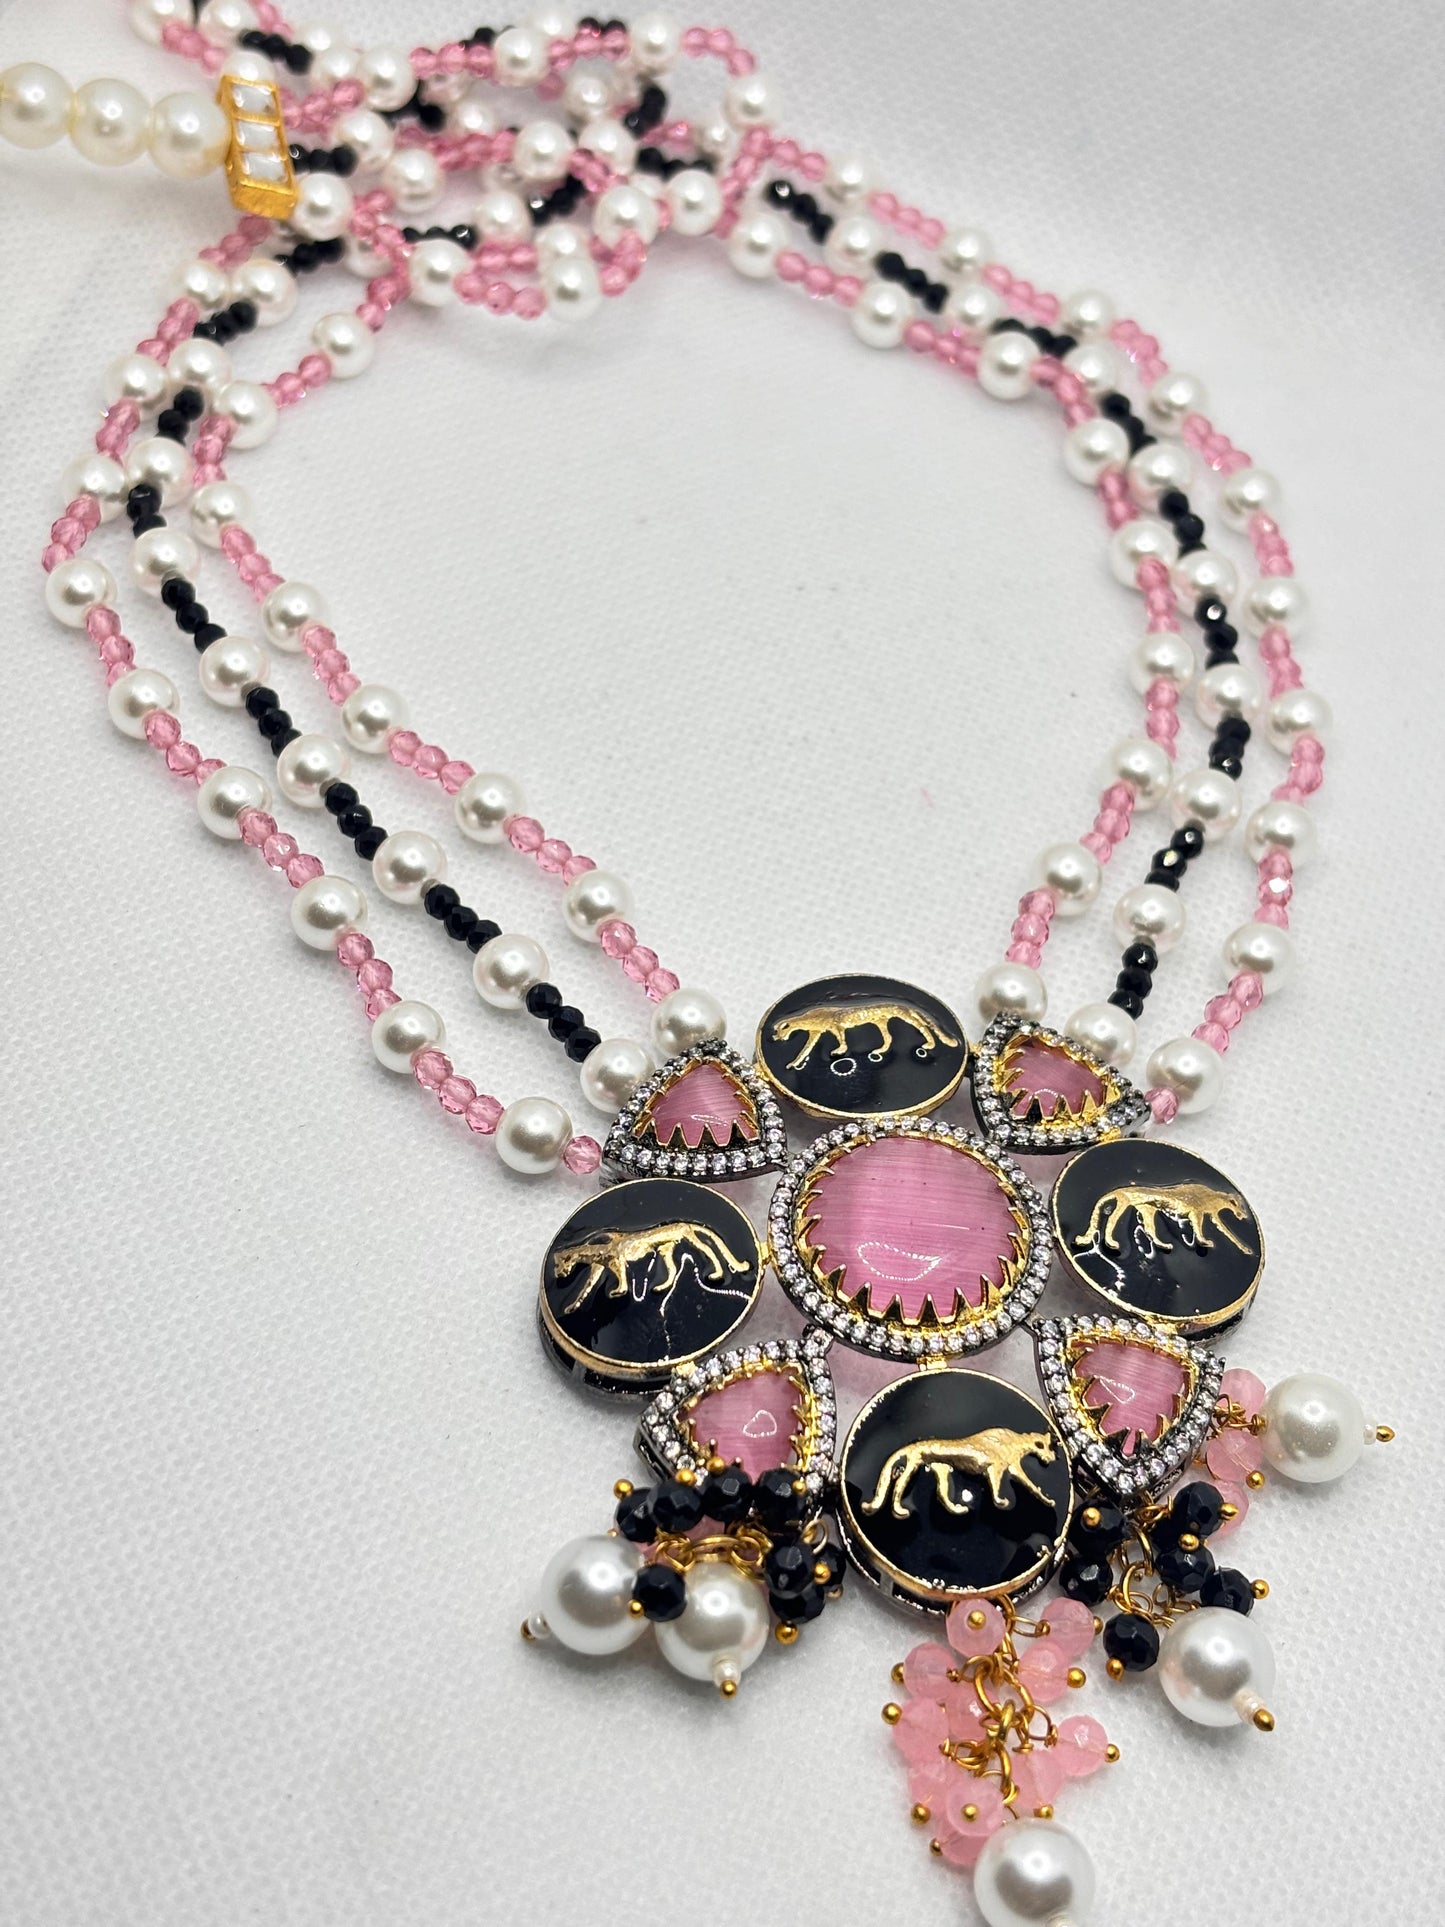 Unmatched Pink Bliss Long Necklace